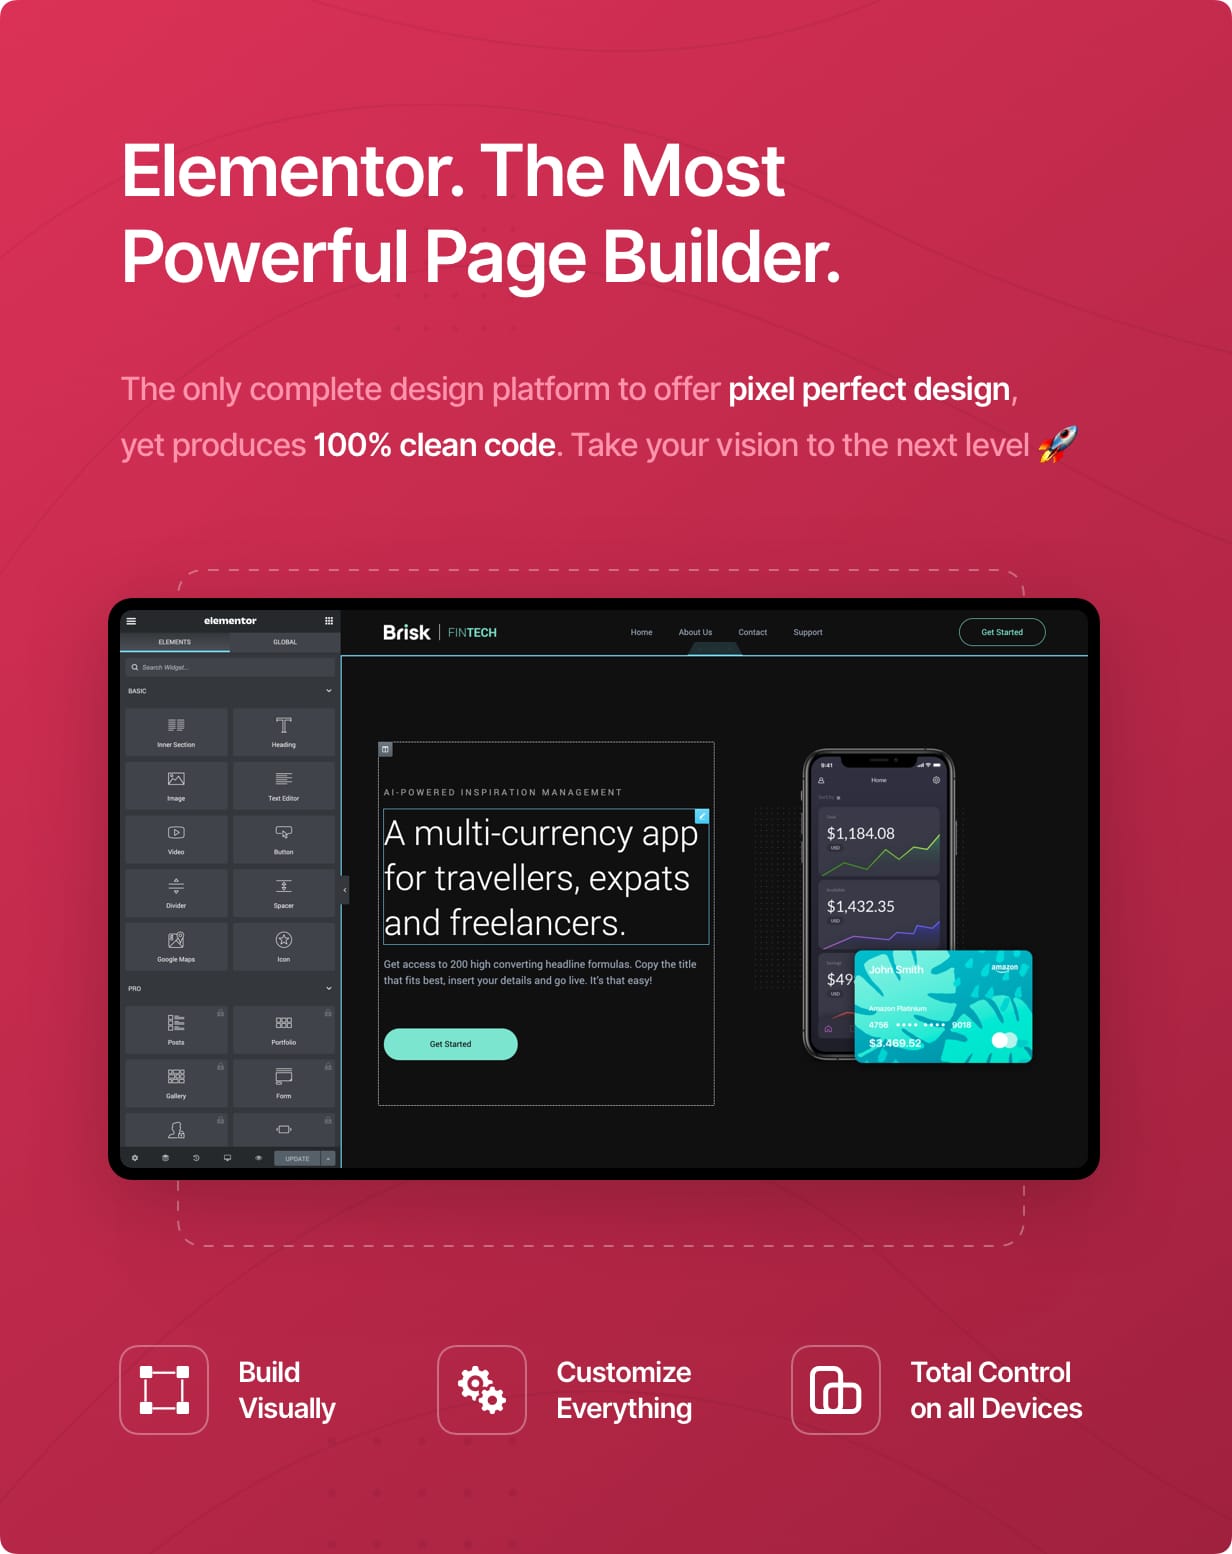 Elementor. The Most Powerful Page Builder.